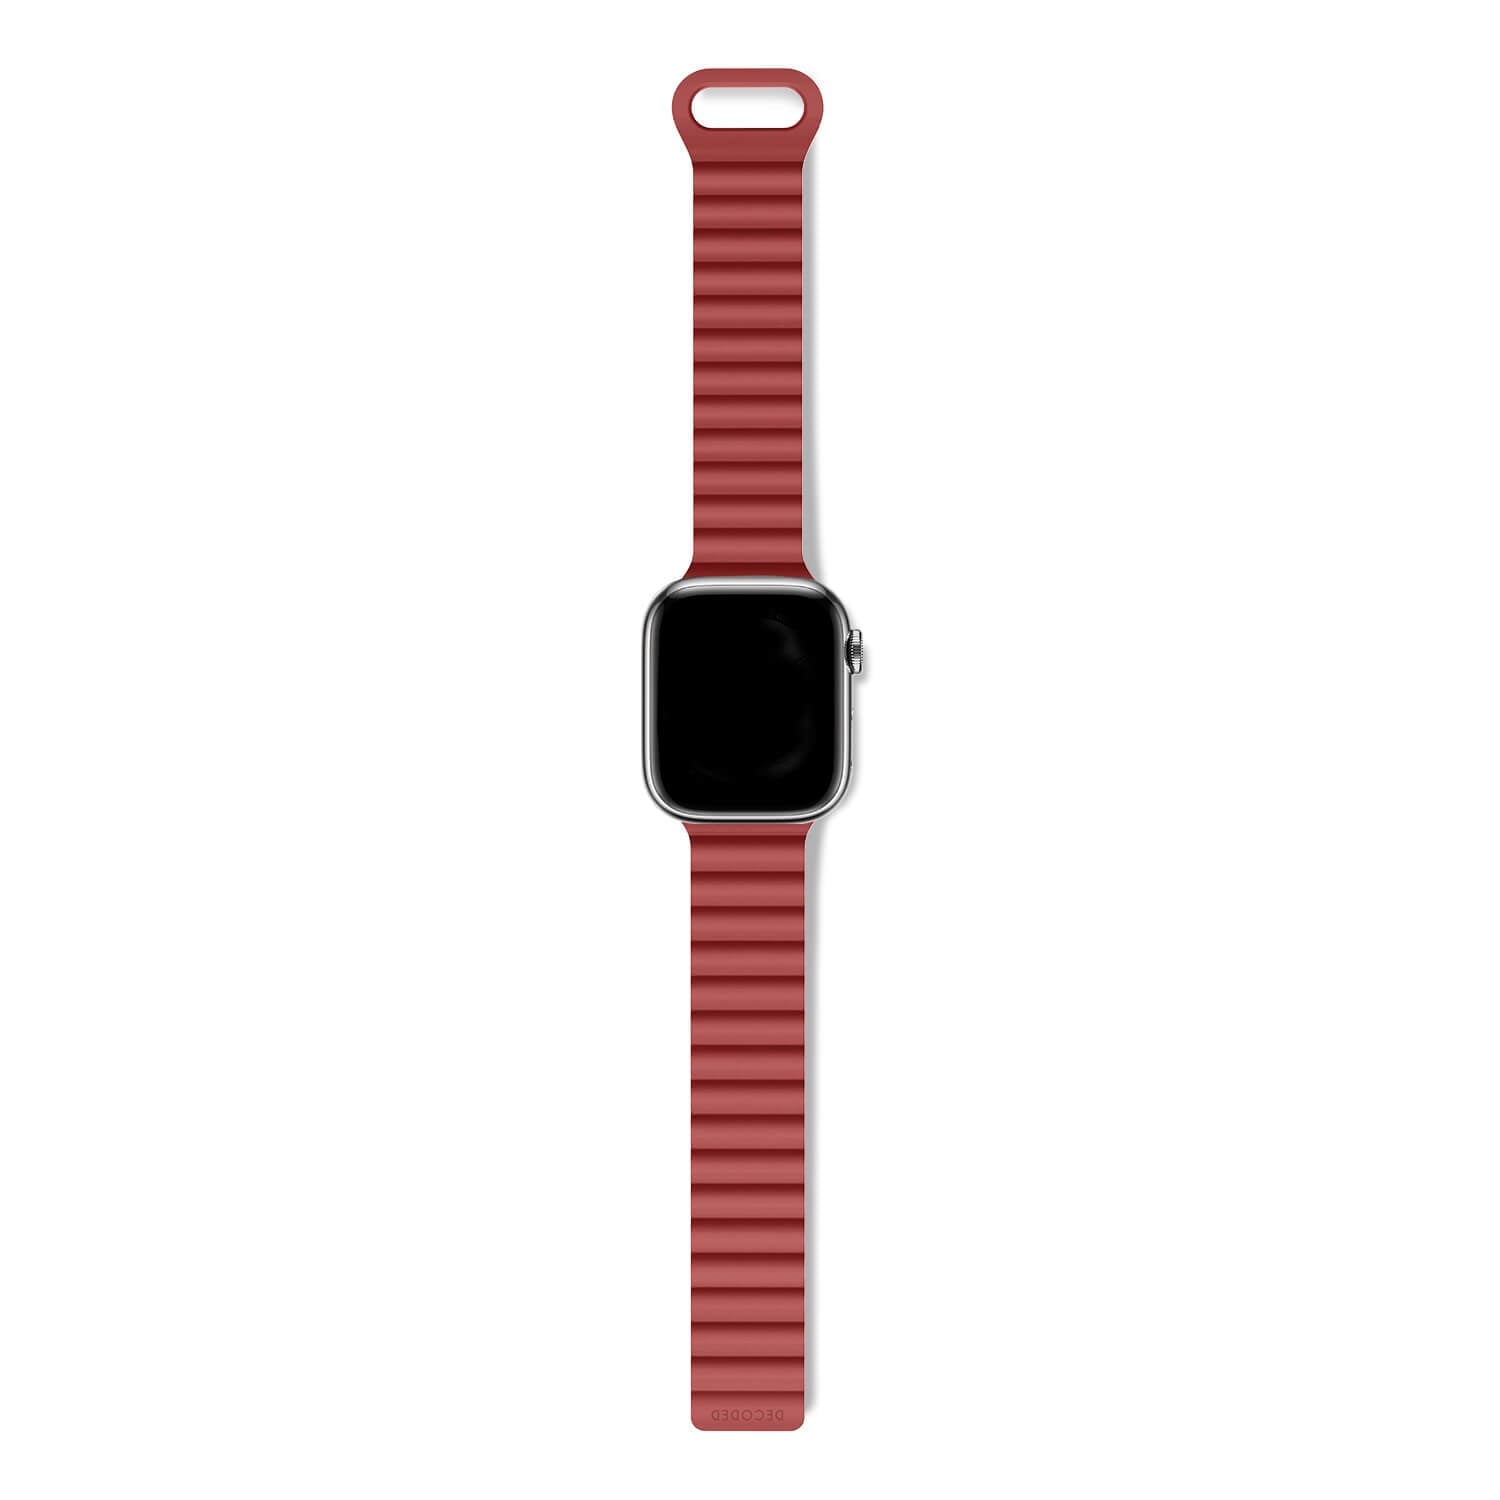 Silicone Traction Loop Strap Apple Watch SE 44mm, Astro Dust